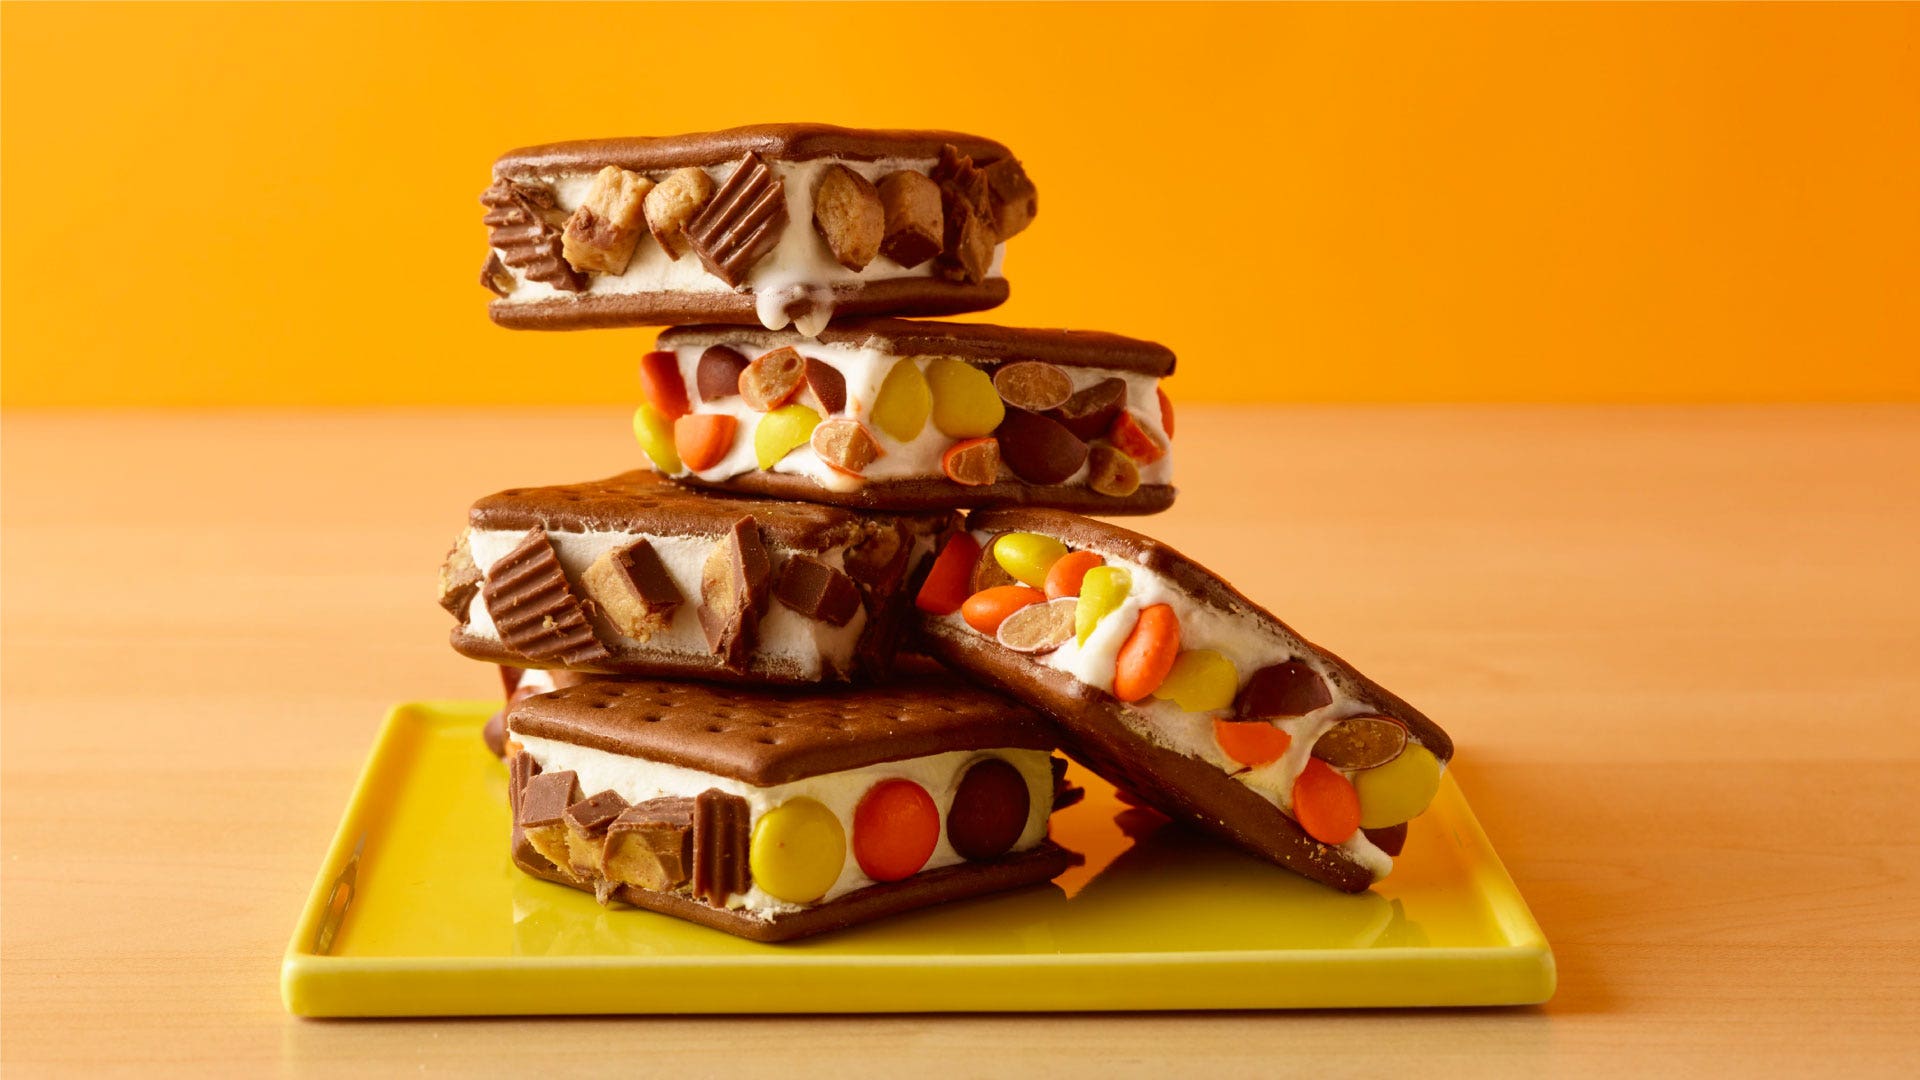 REESE’S Ice Cream Sandwiches With Peanut Butter Candy Crumbles